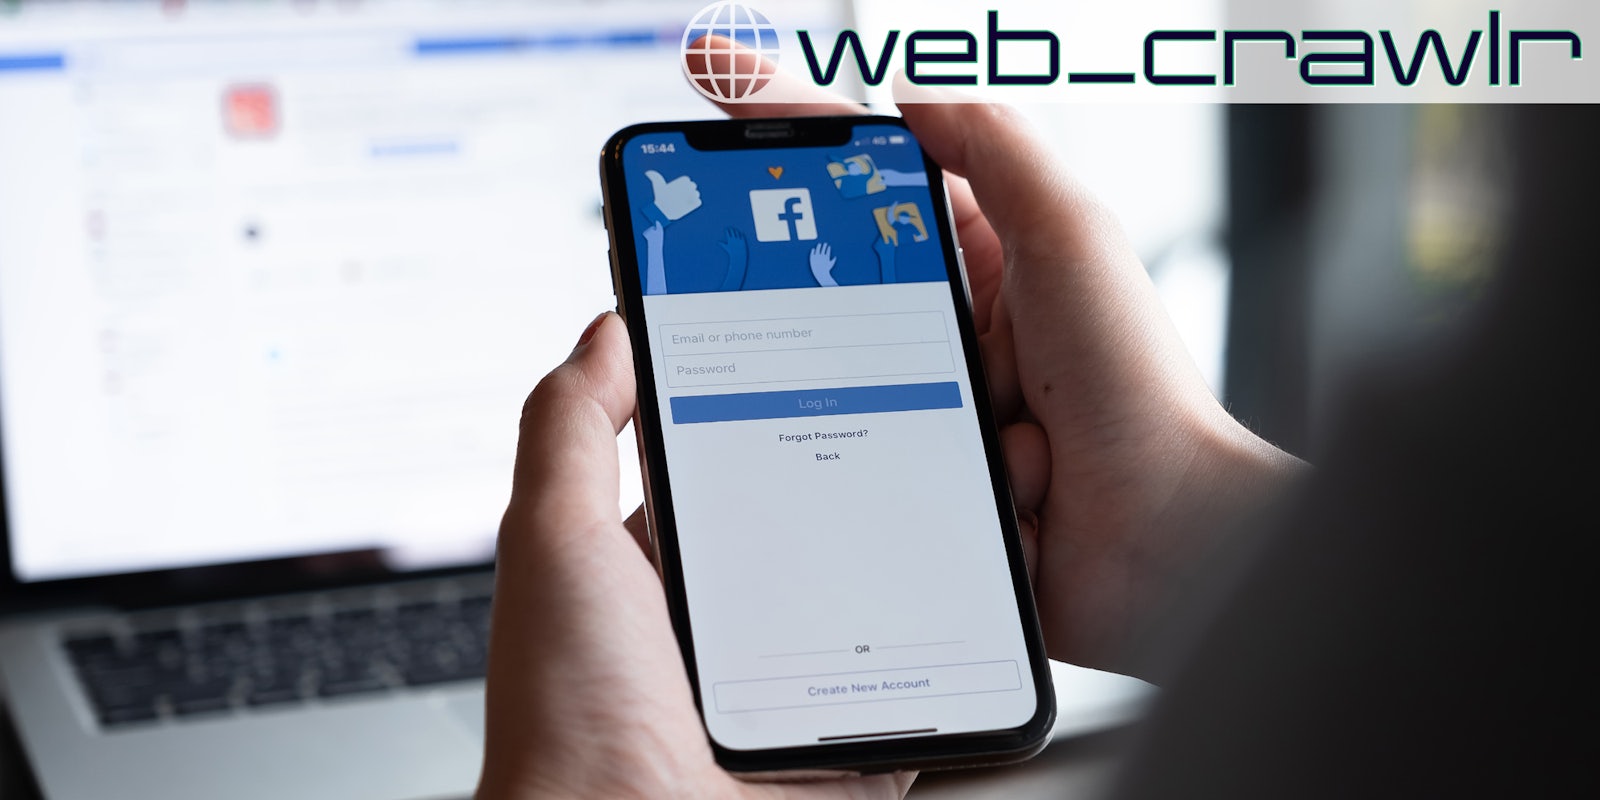 A person holding a smartphone with the Facebook login screen on it. The Daily Dot newsletter web_crawlr logo is in the top right corner.